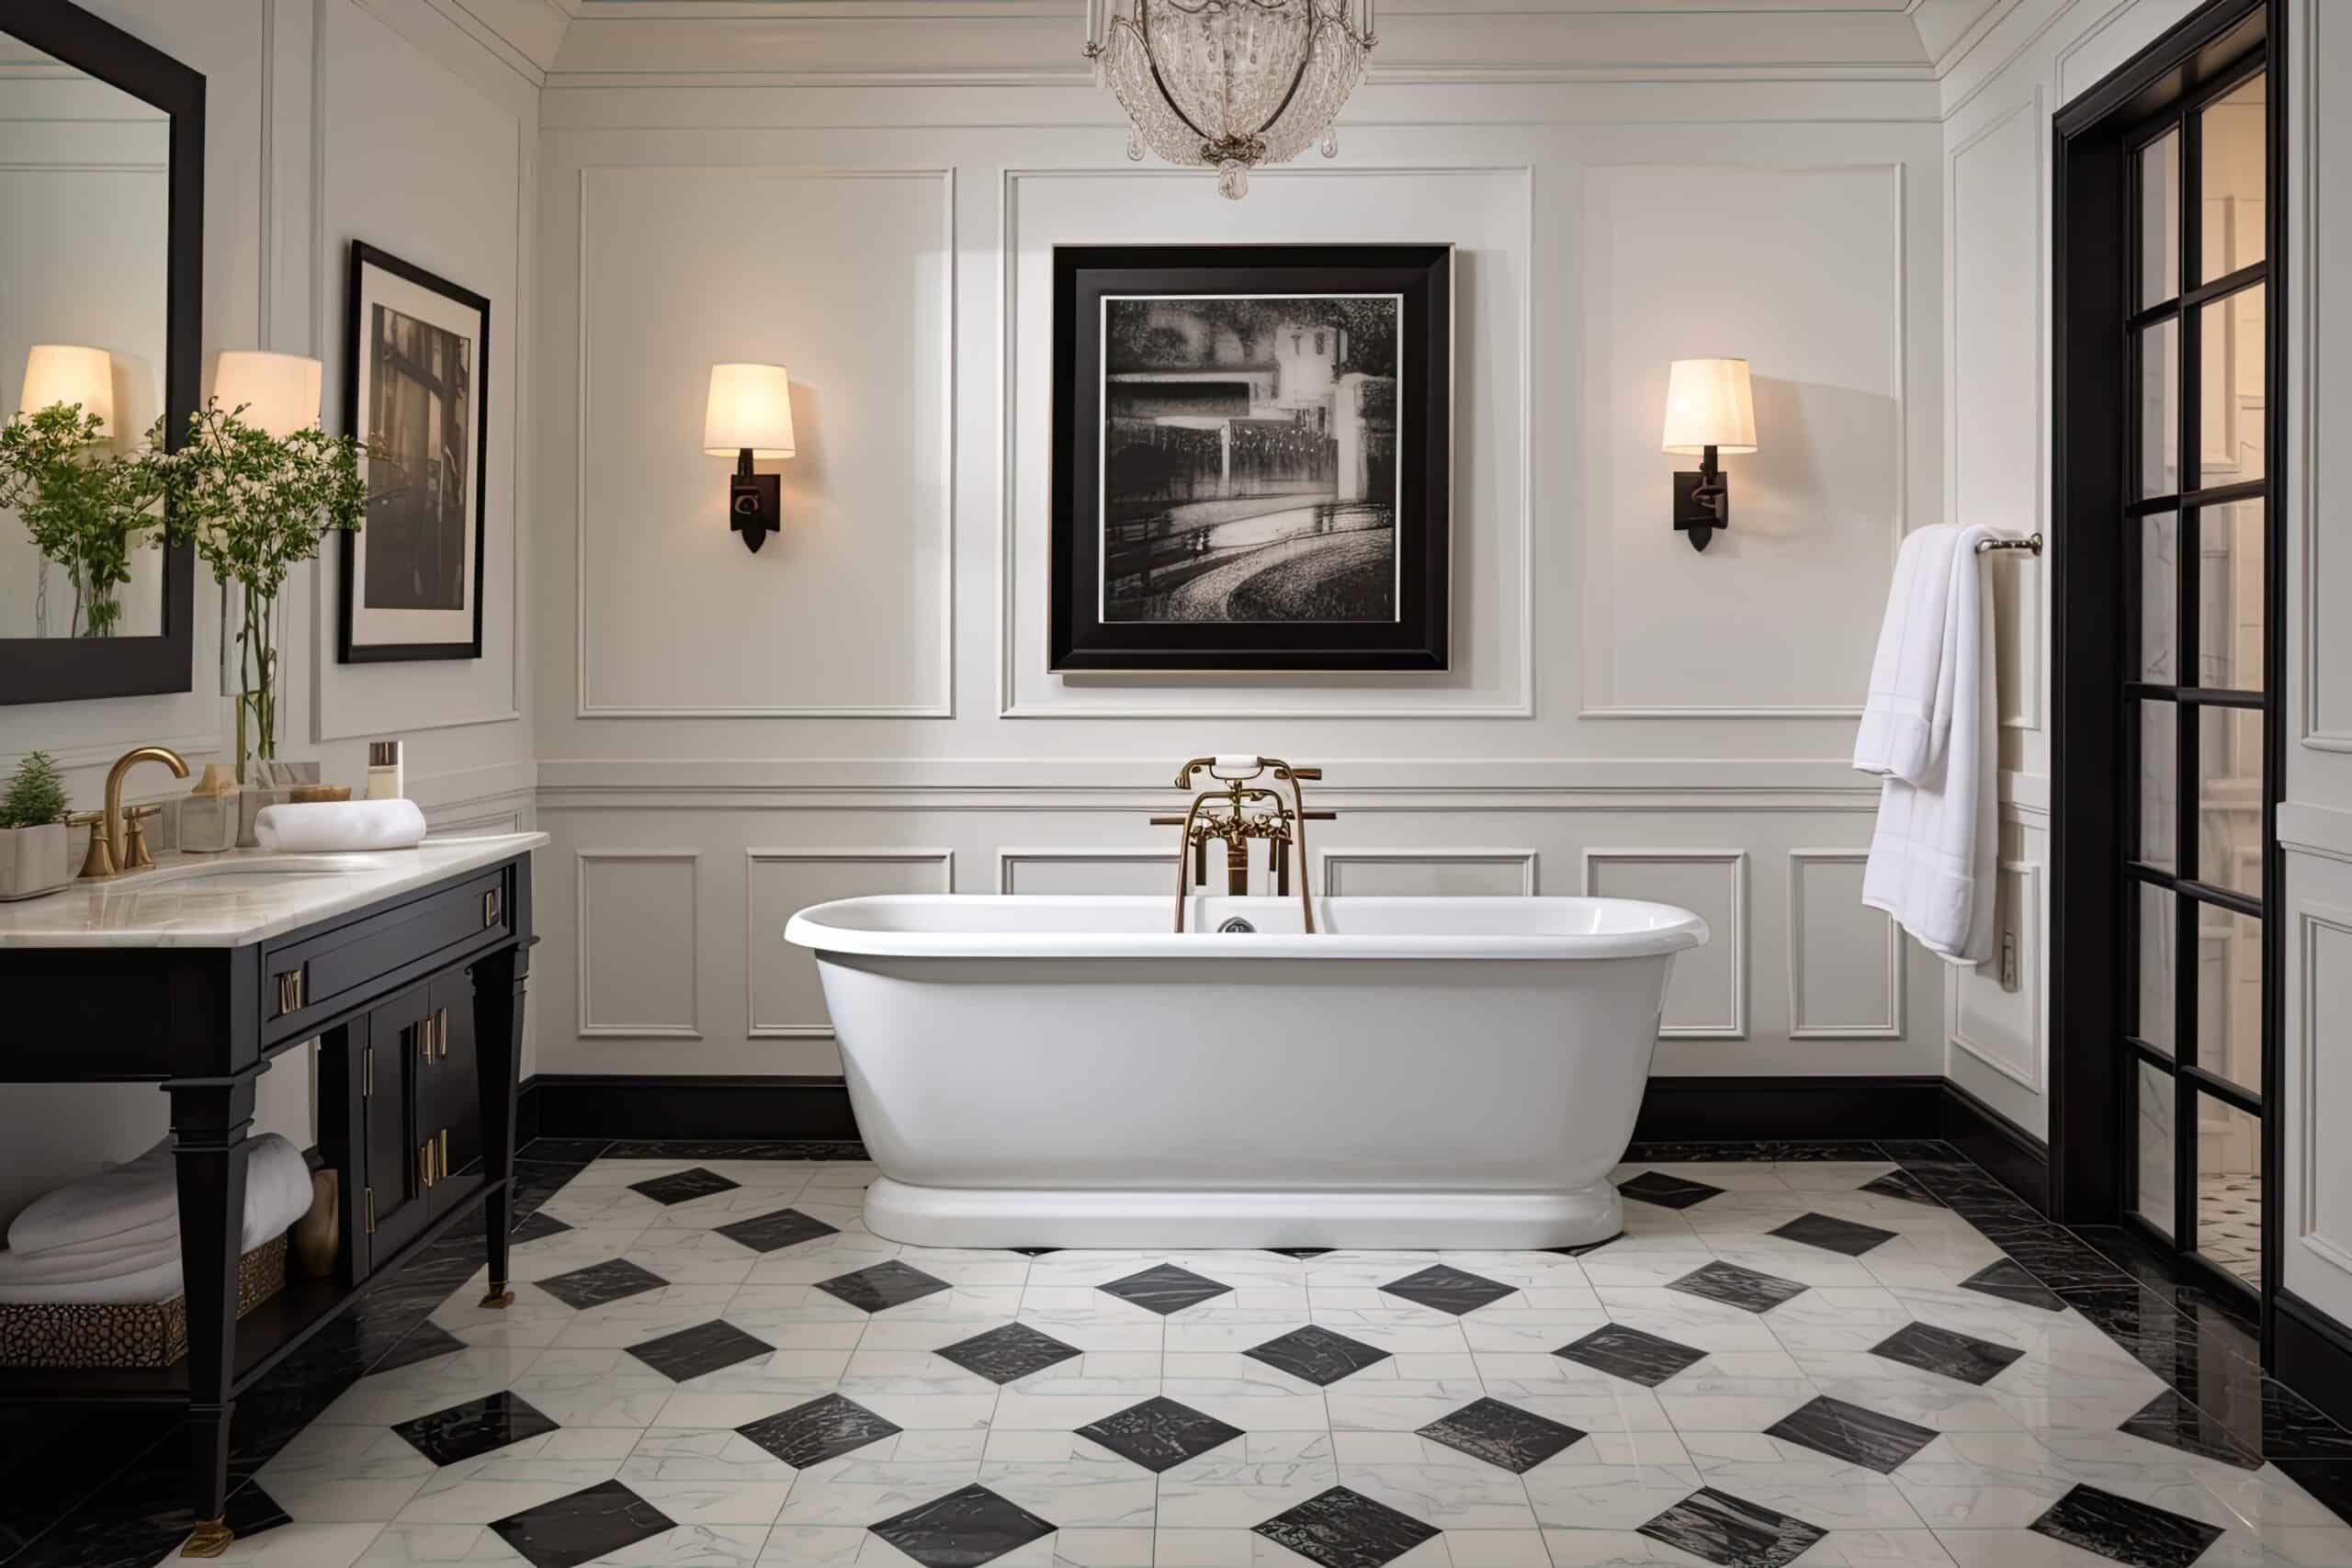 A highend bathroom featuring a freestanding bathtub, an elegant floor made of mosaic tiles, and white doors adorned with black handles. bathroom wainscoting